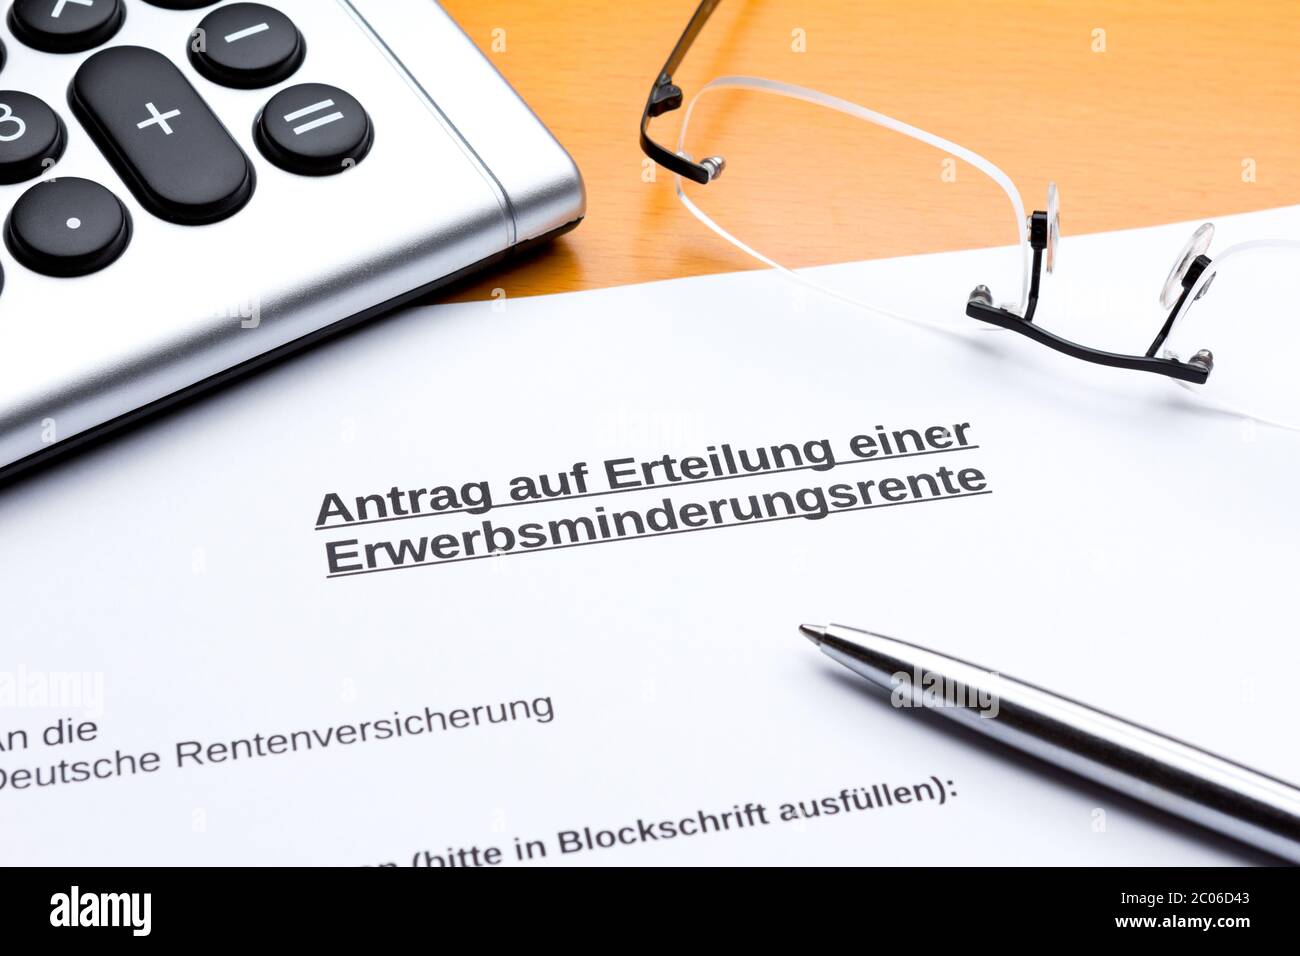 Request for partial invalidity pension in germany: antrag erwerbsminderungsrente. Stock Photo